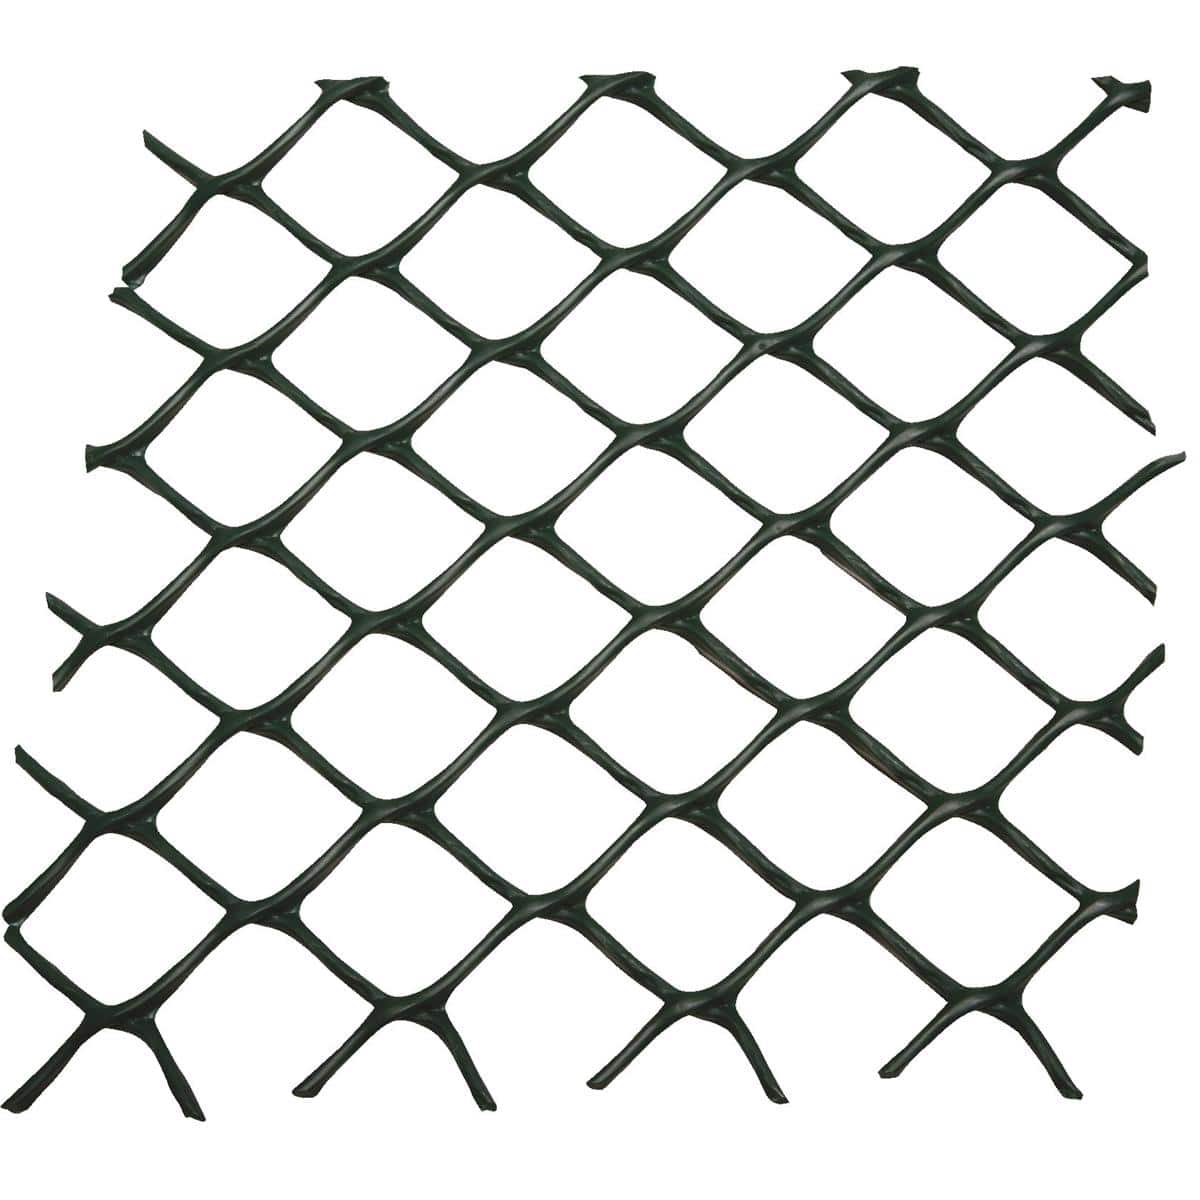 Tenax 500-ft x 14-ft Black Plastic Bird Netting Rolled Fencing with Mesh  Size 1/4-in x 1/4-in in the Rolled Fencing department at